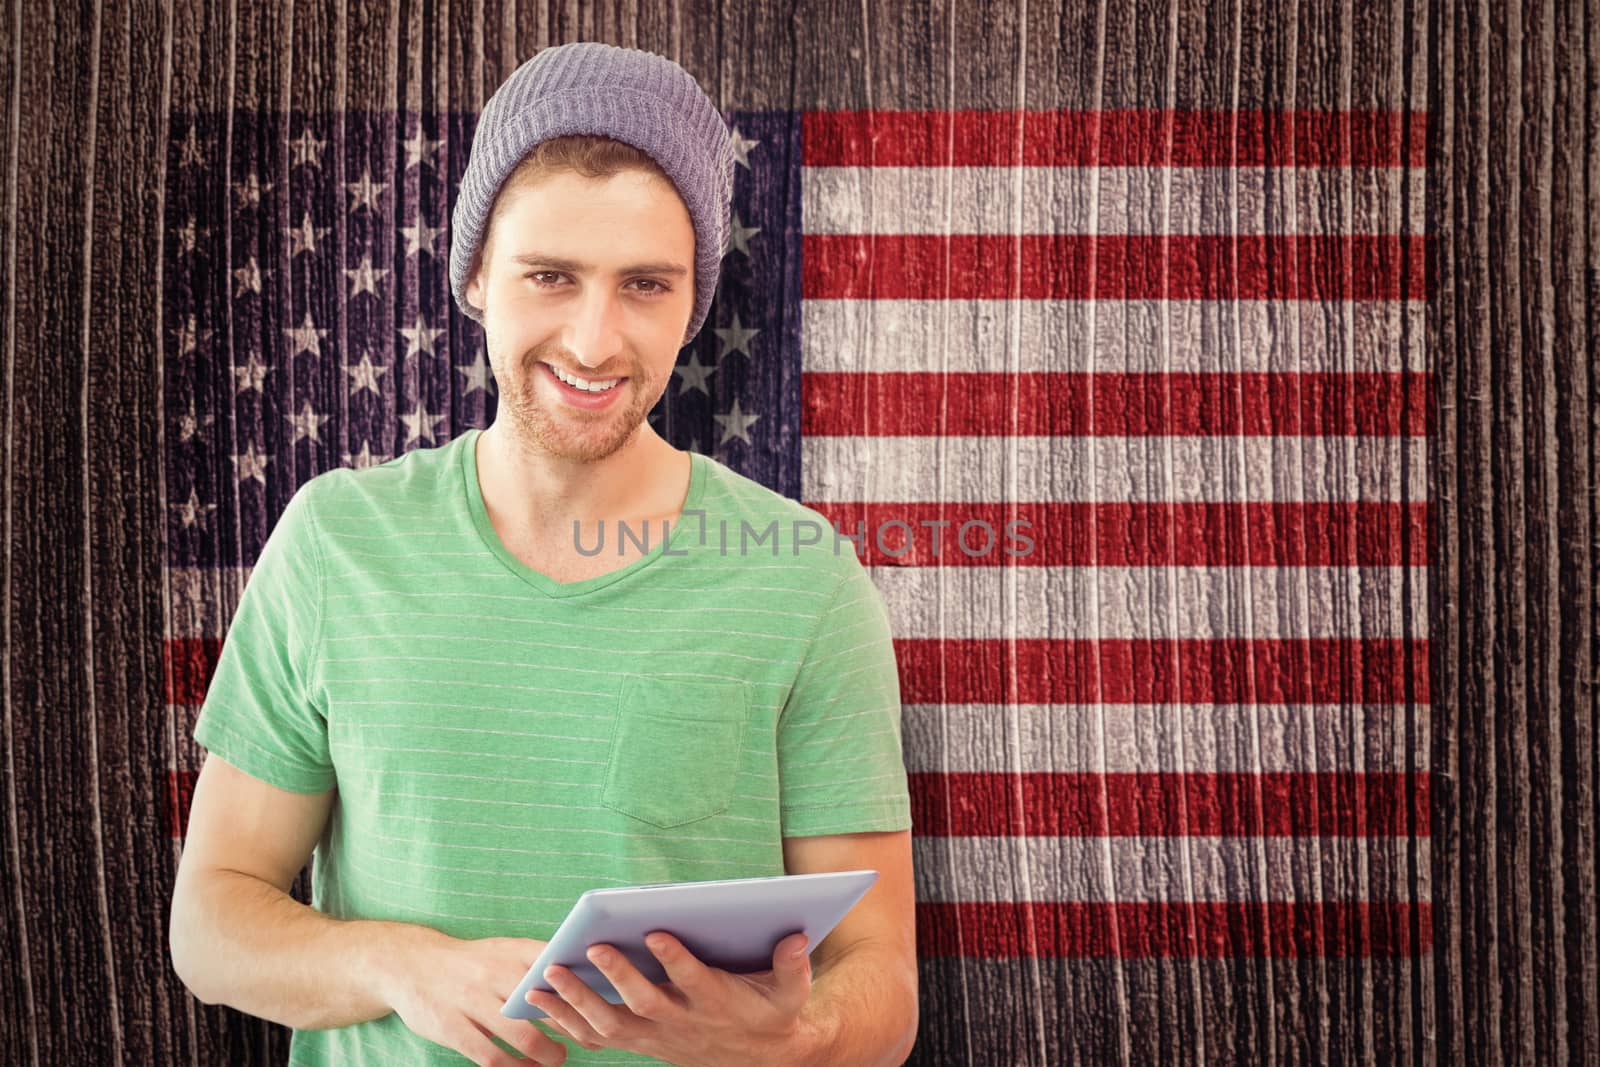 Student using tablet against composite image of usa national flag